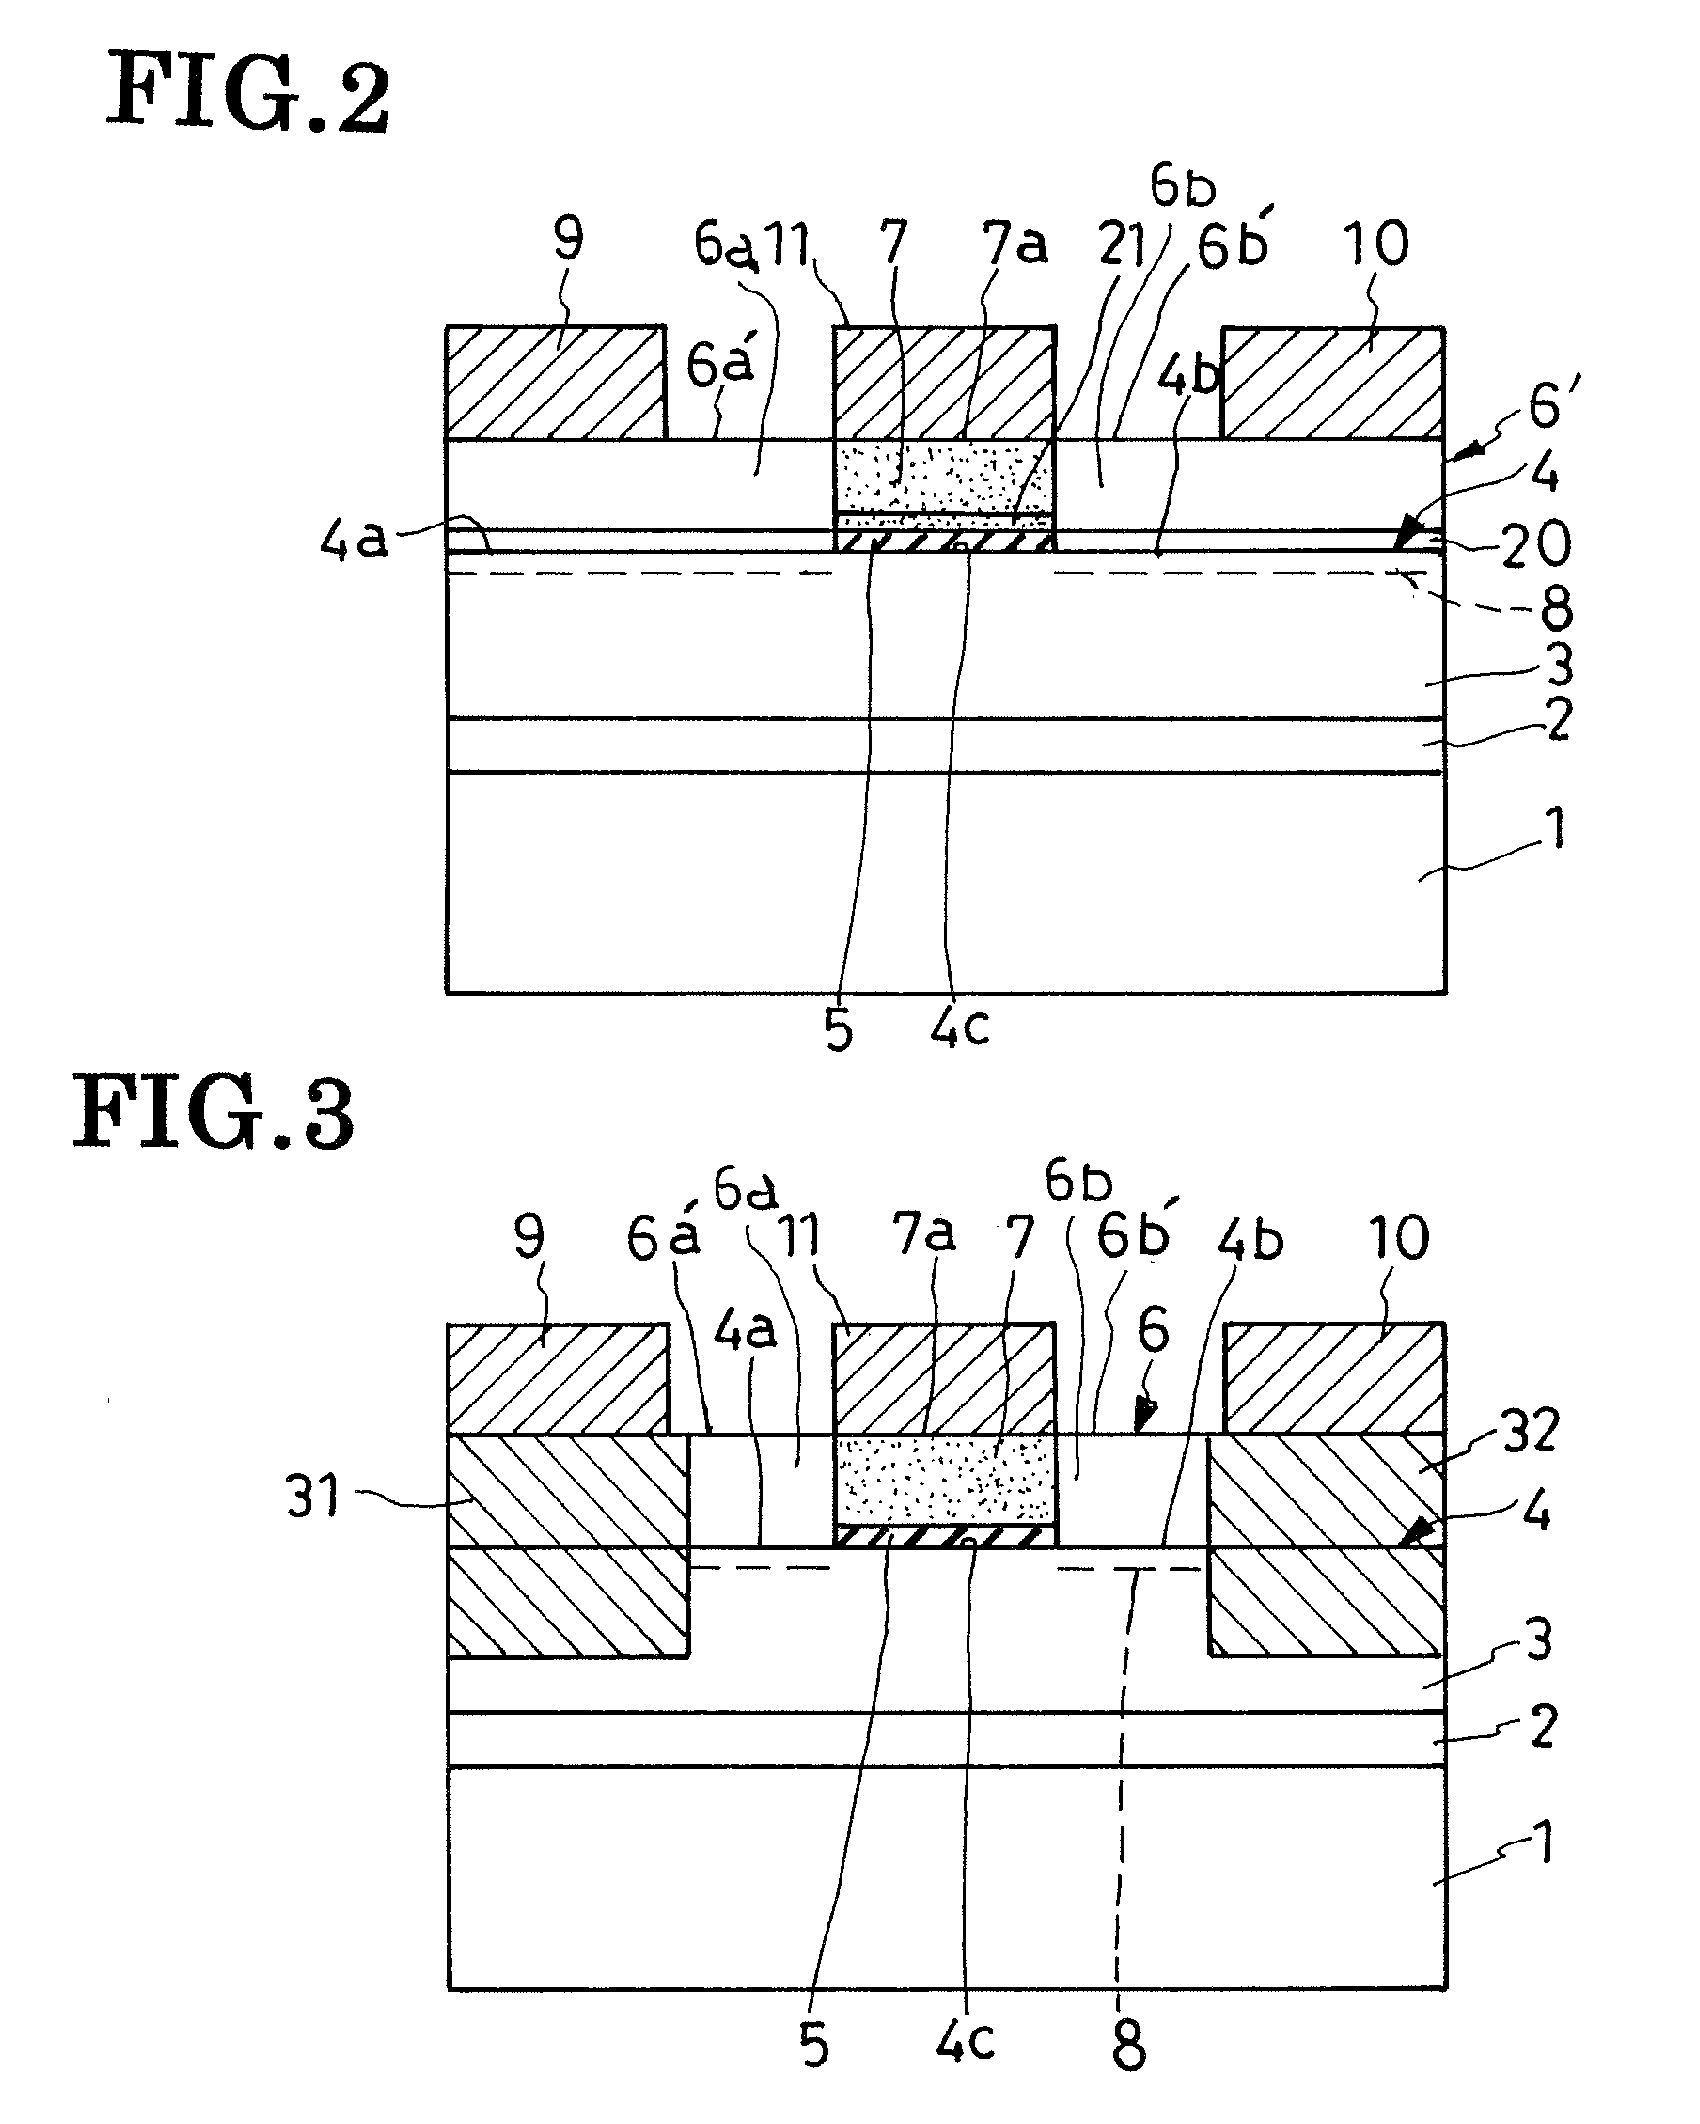 Normally-off field-effect semiconductor device